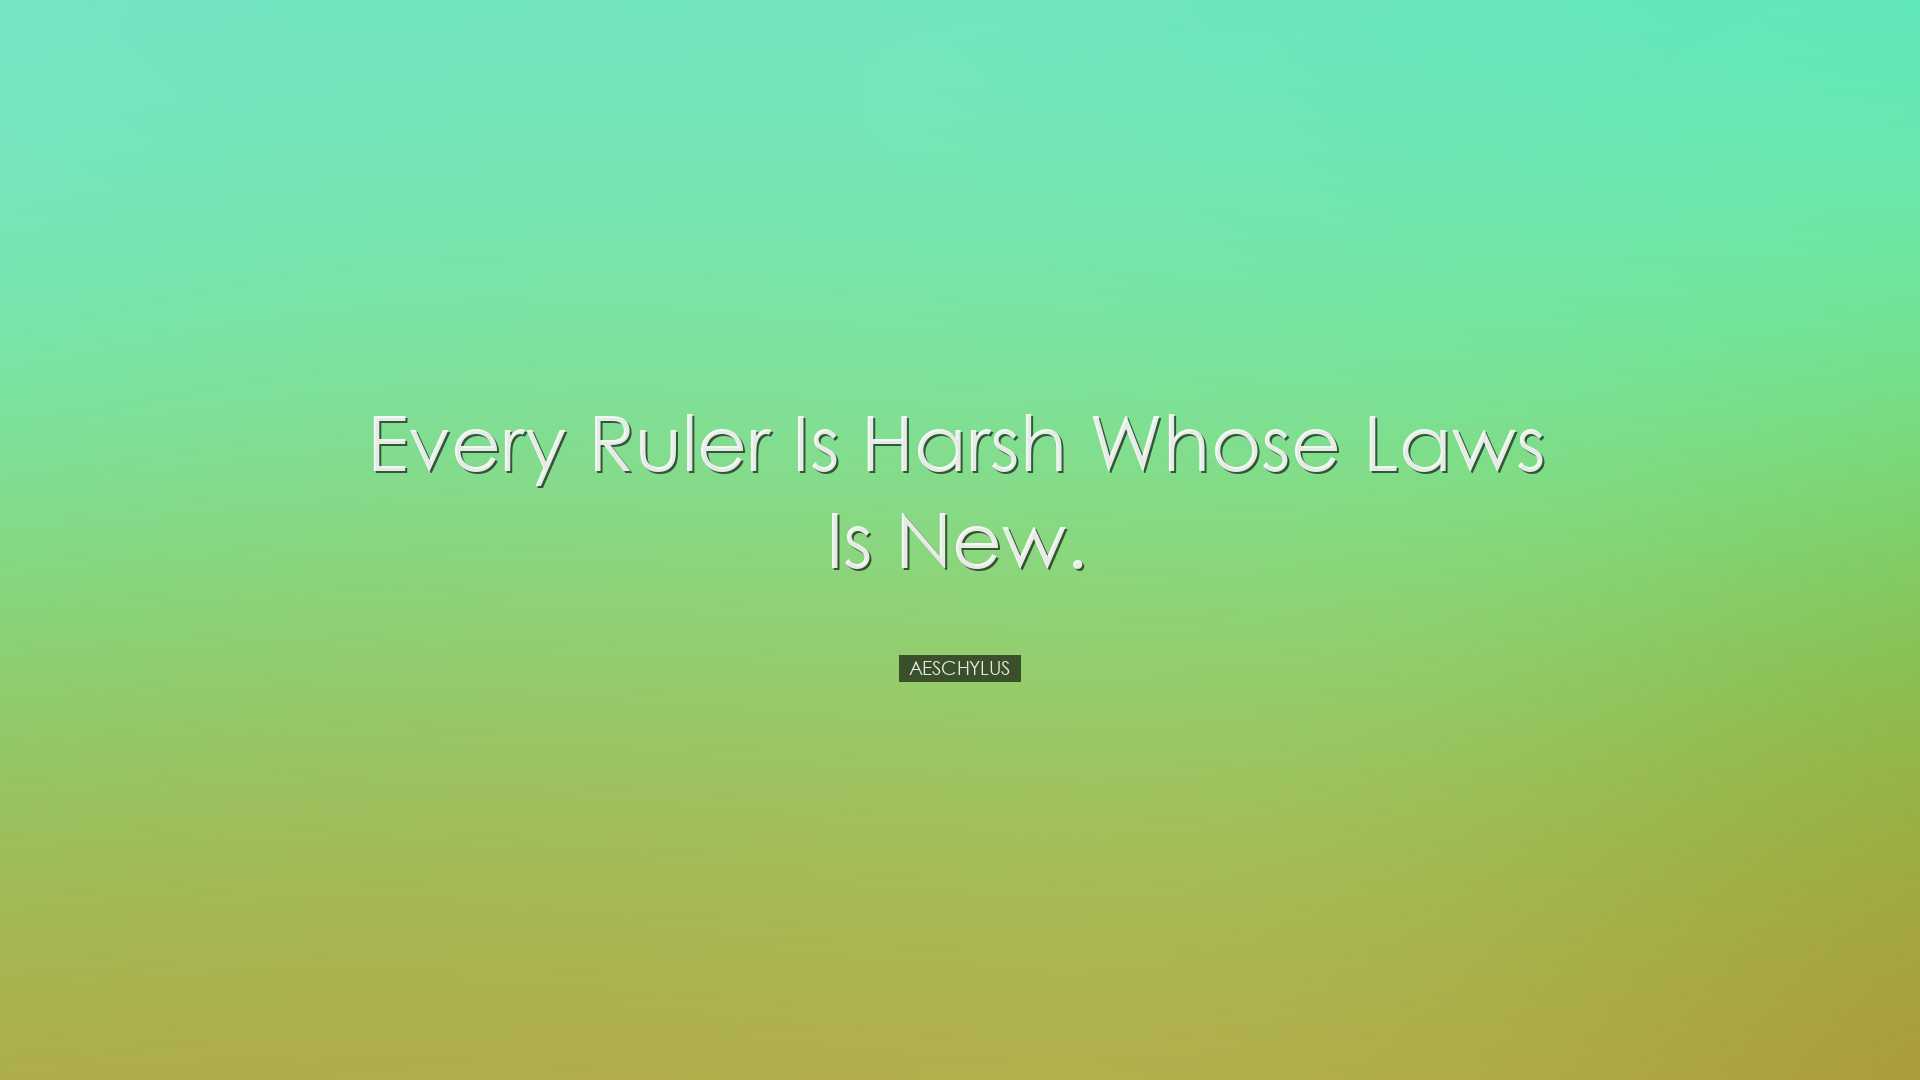 Every ruler is harsh whose laws is new. - Aeschylus